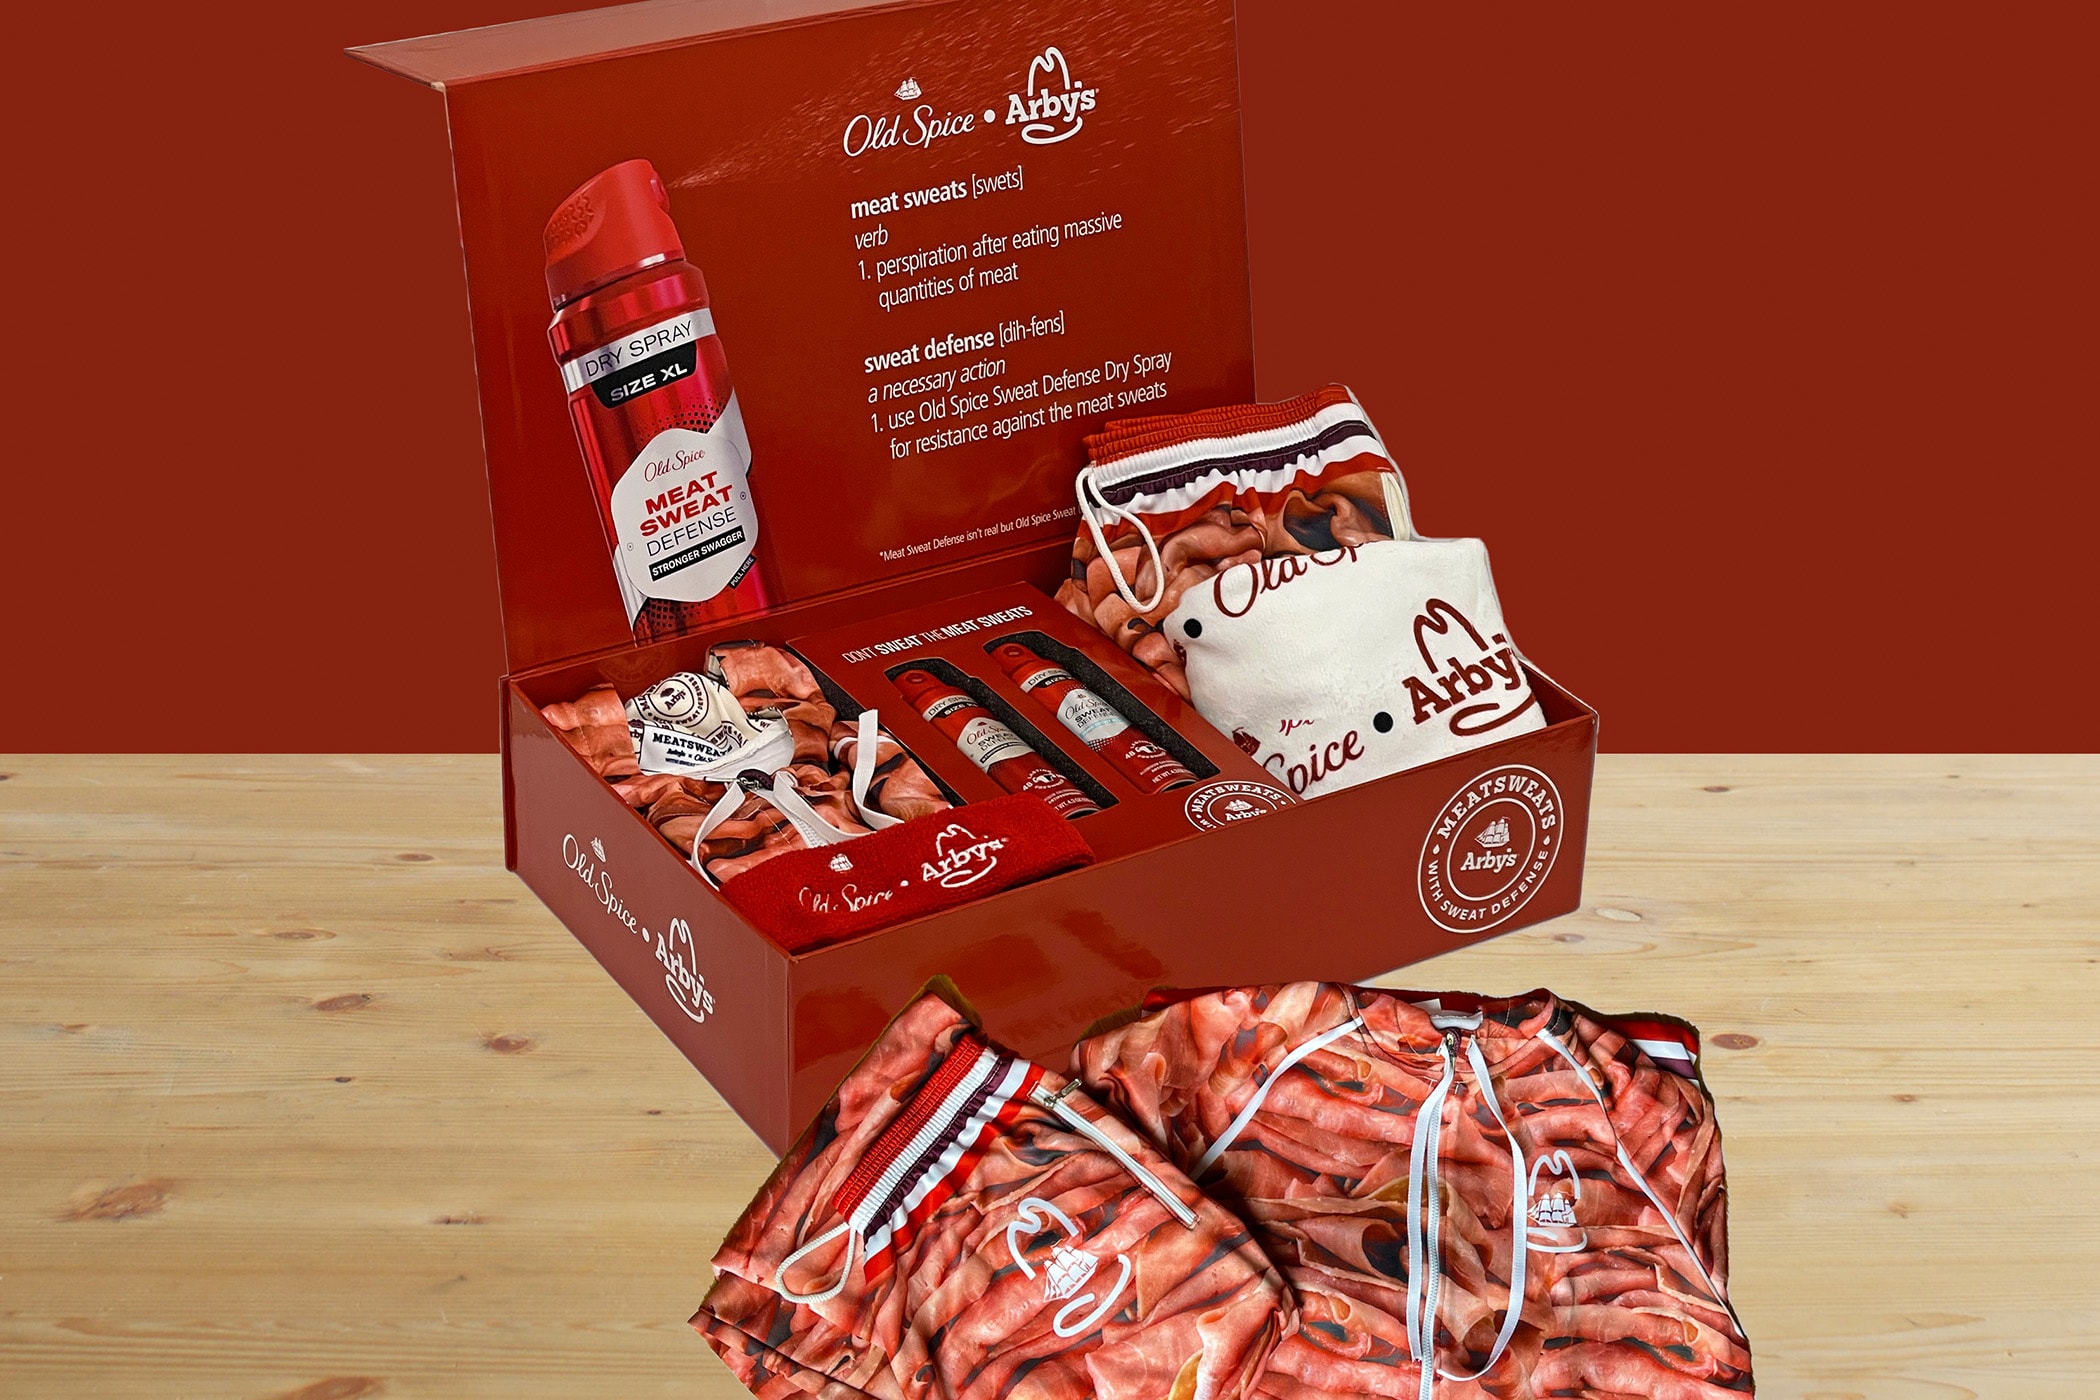 Arby's x Old Spice Meat Sweat Kit Collaboration Apparel